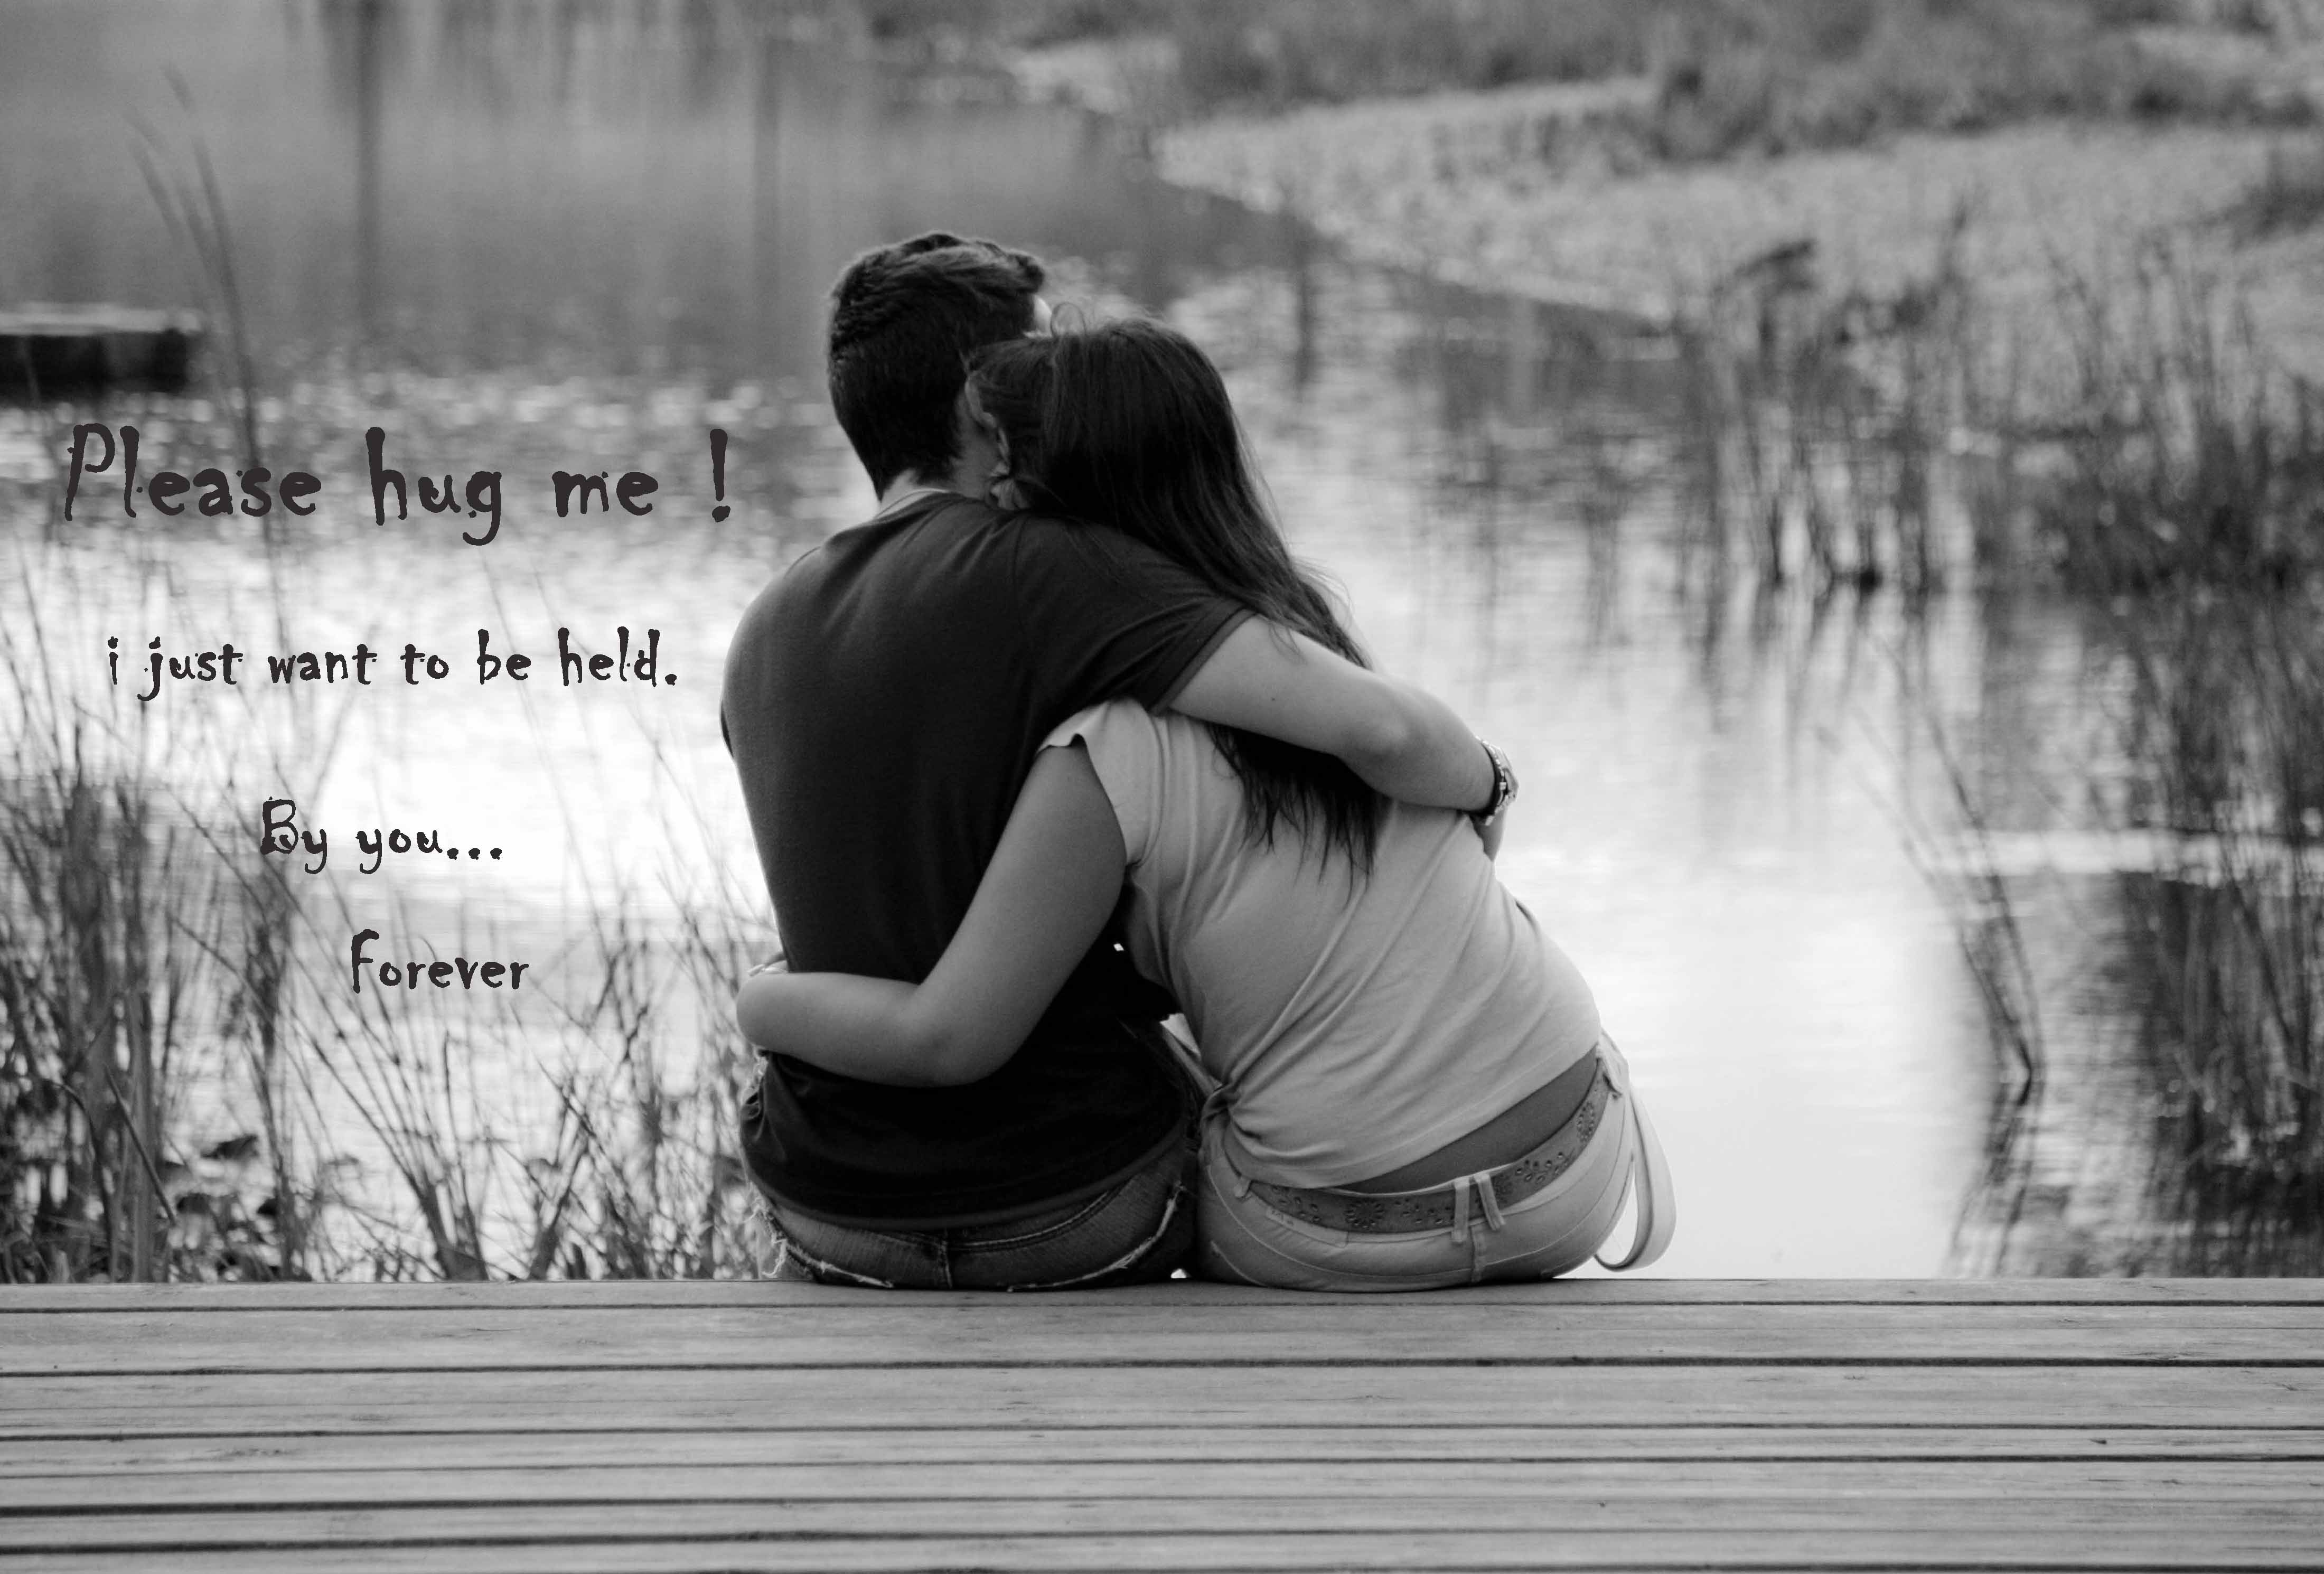 Love Hug Wallpapers With Quotes - Wallpaper Cave